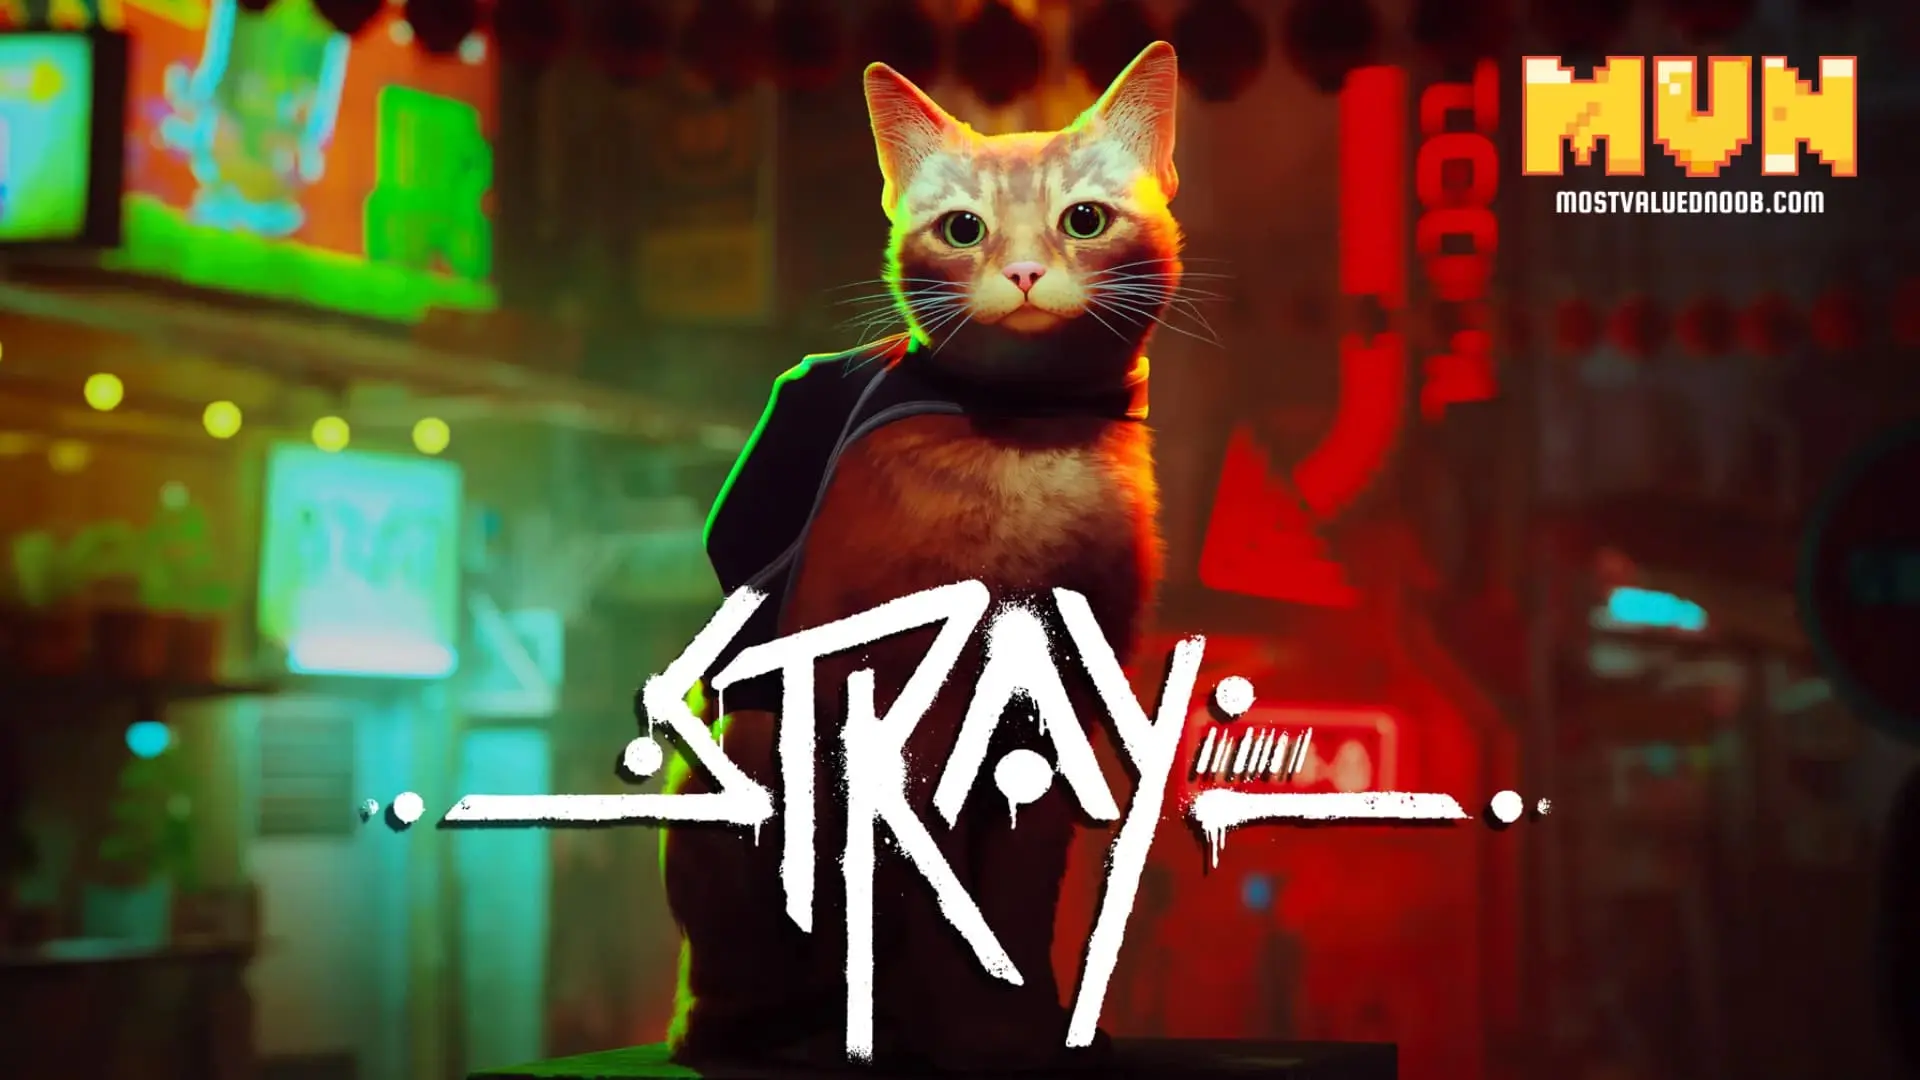 Stray Video Game